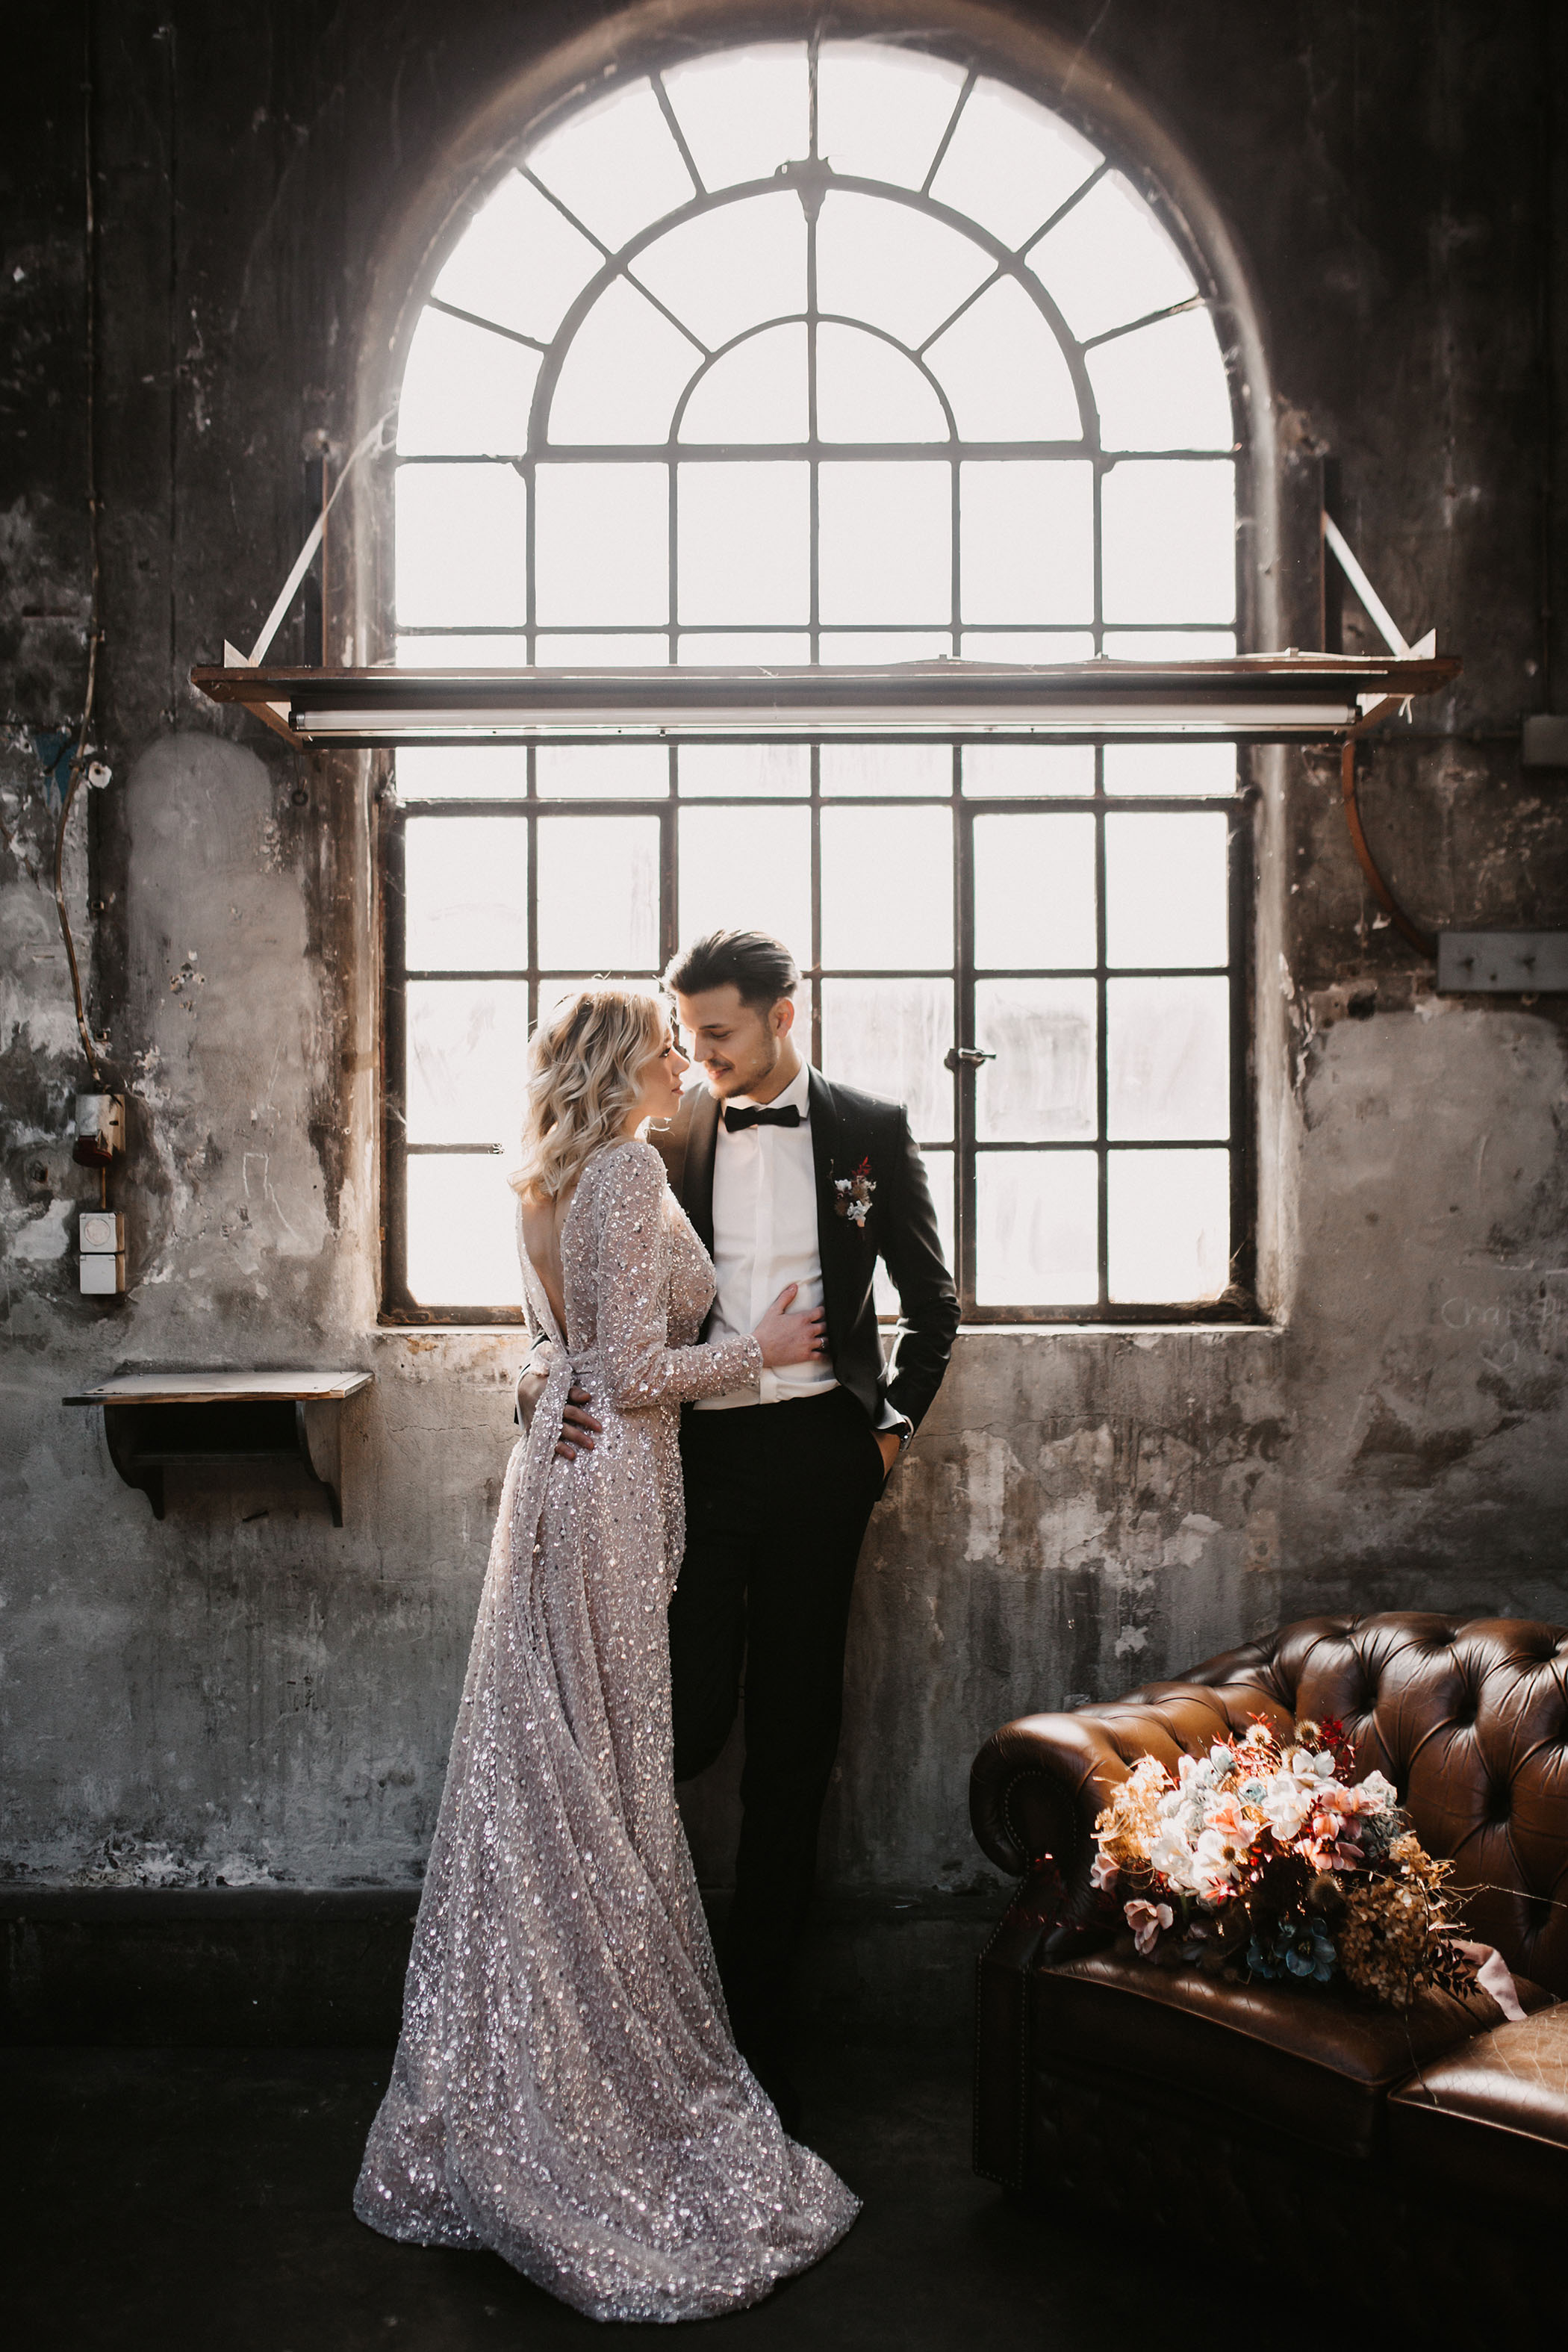 New Year's Eve wedding in industrial setting